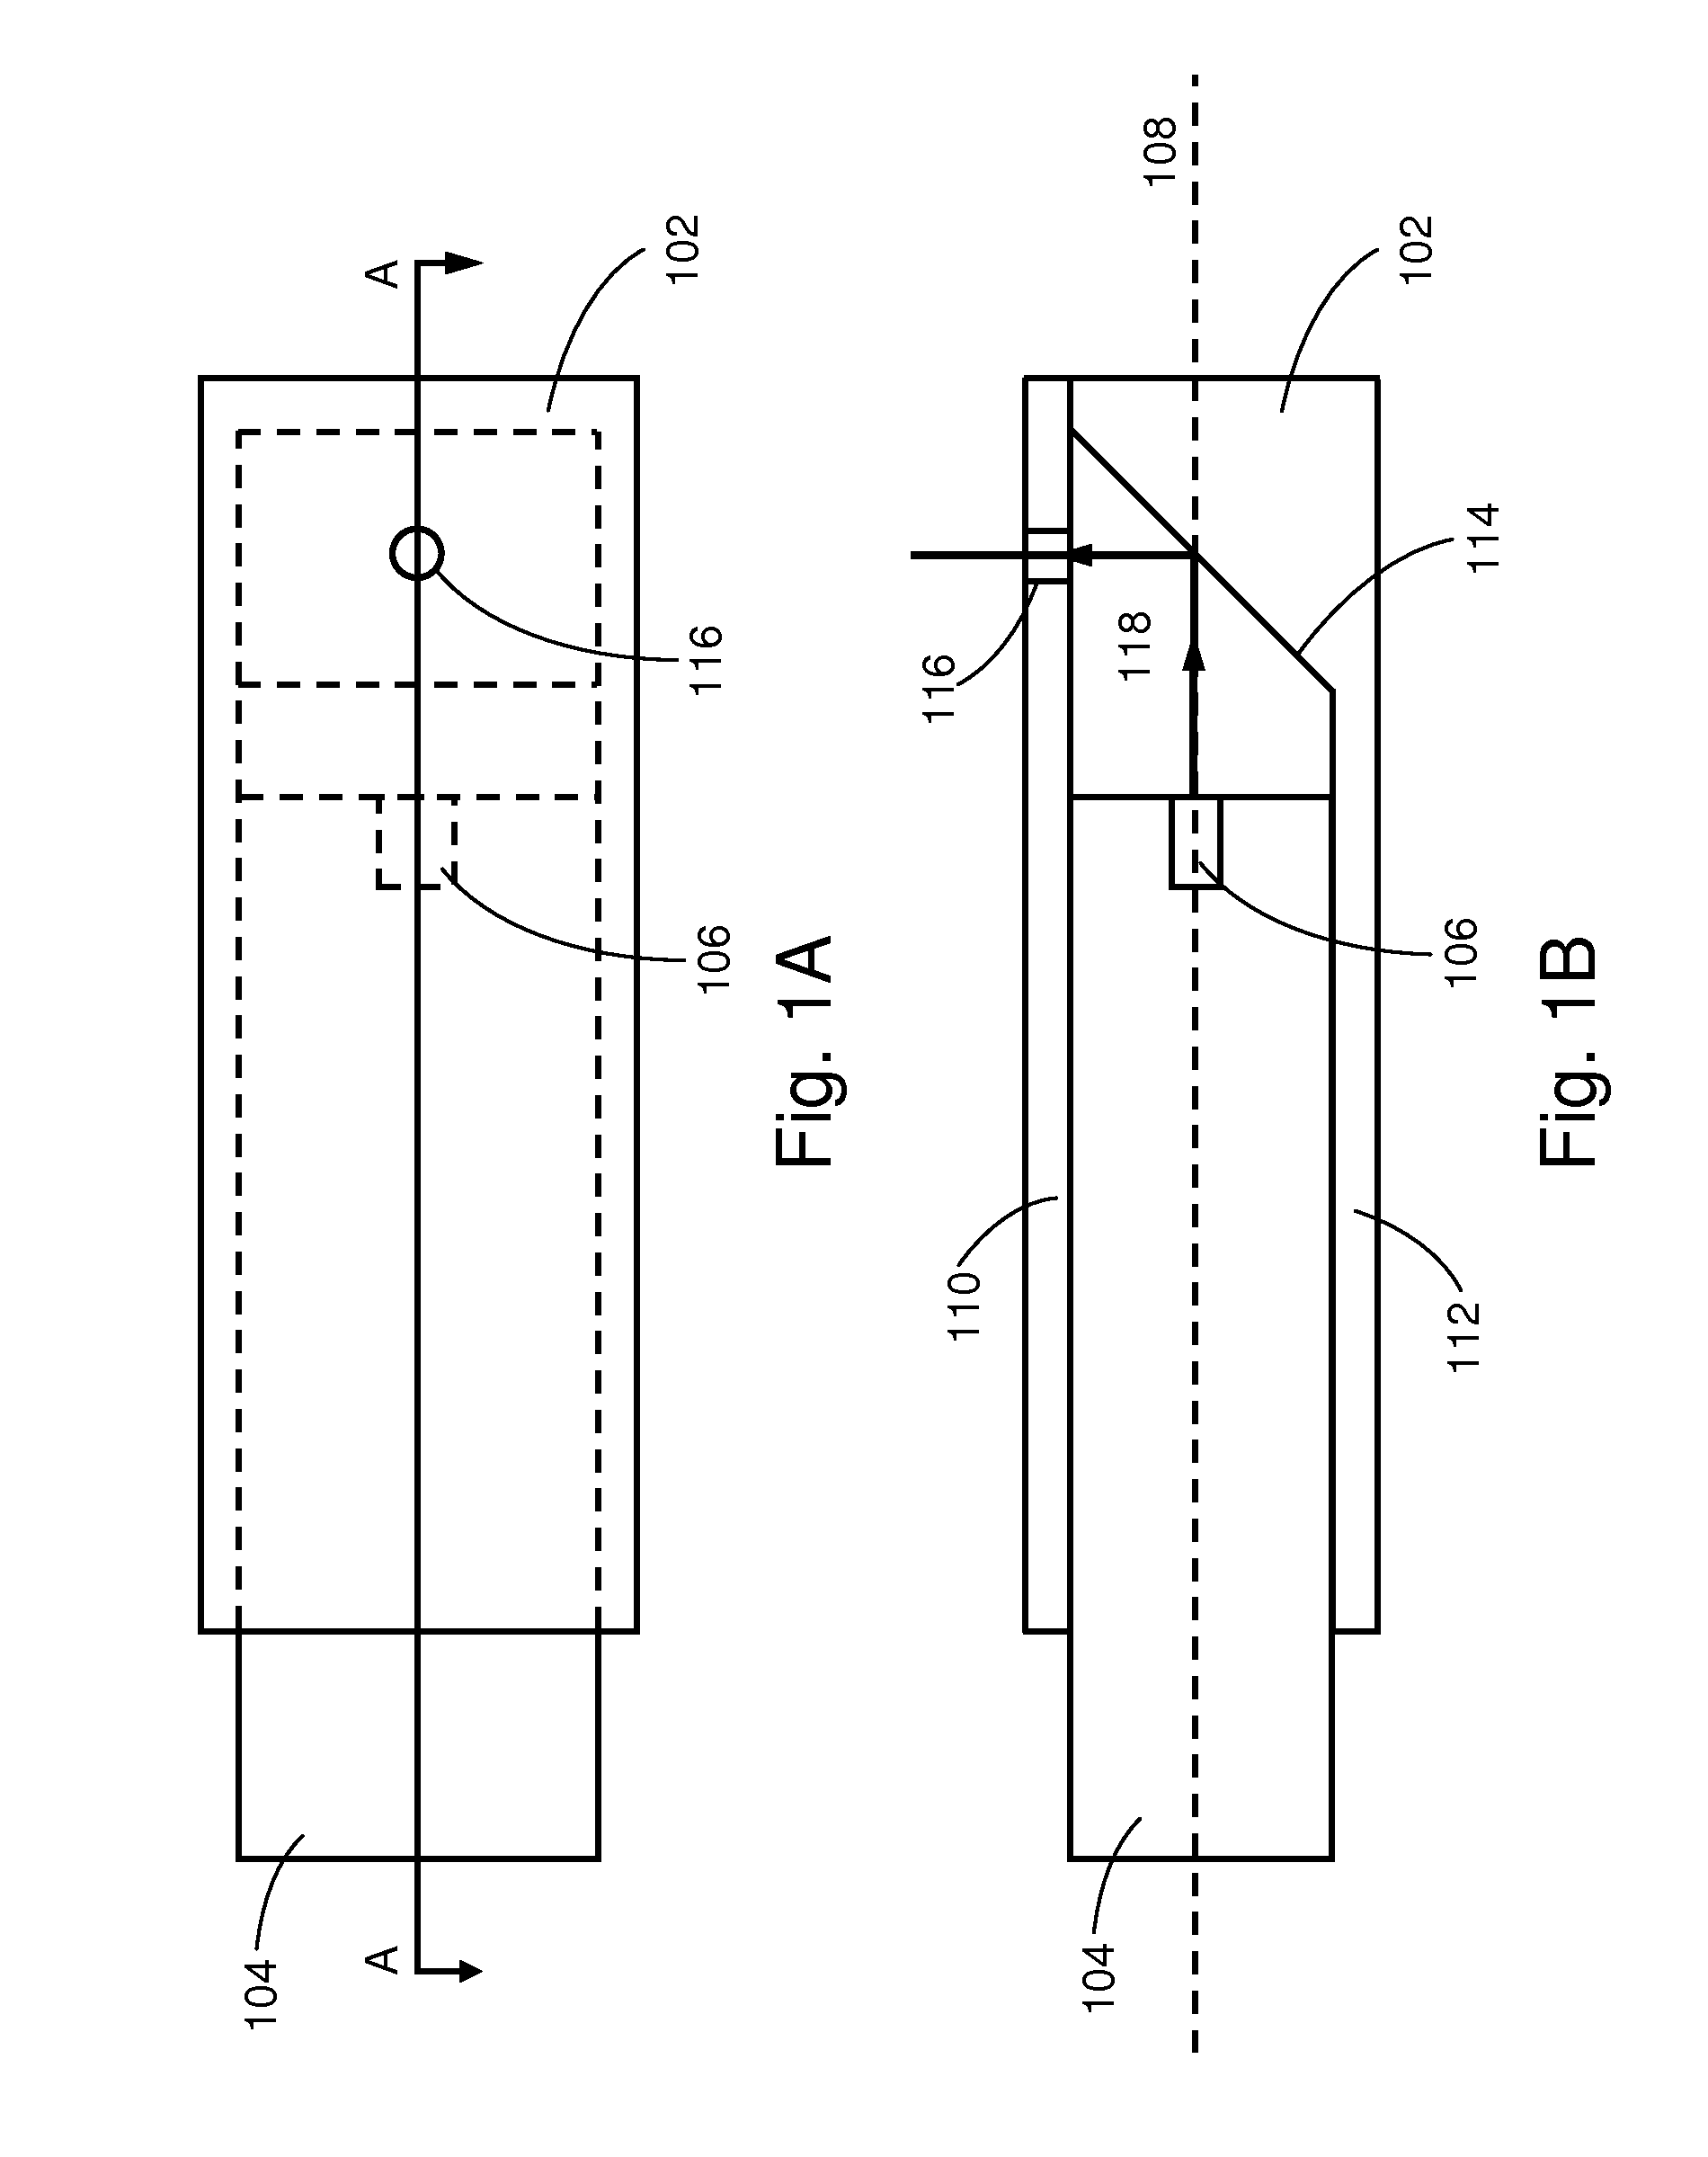 Casing for enclosing electronic device